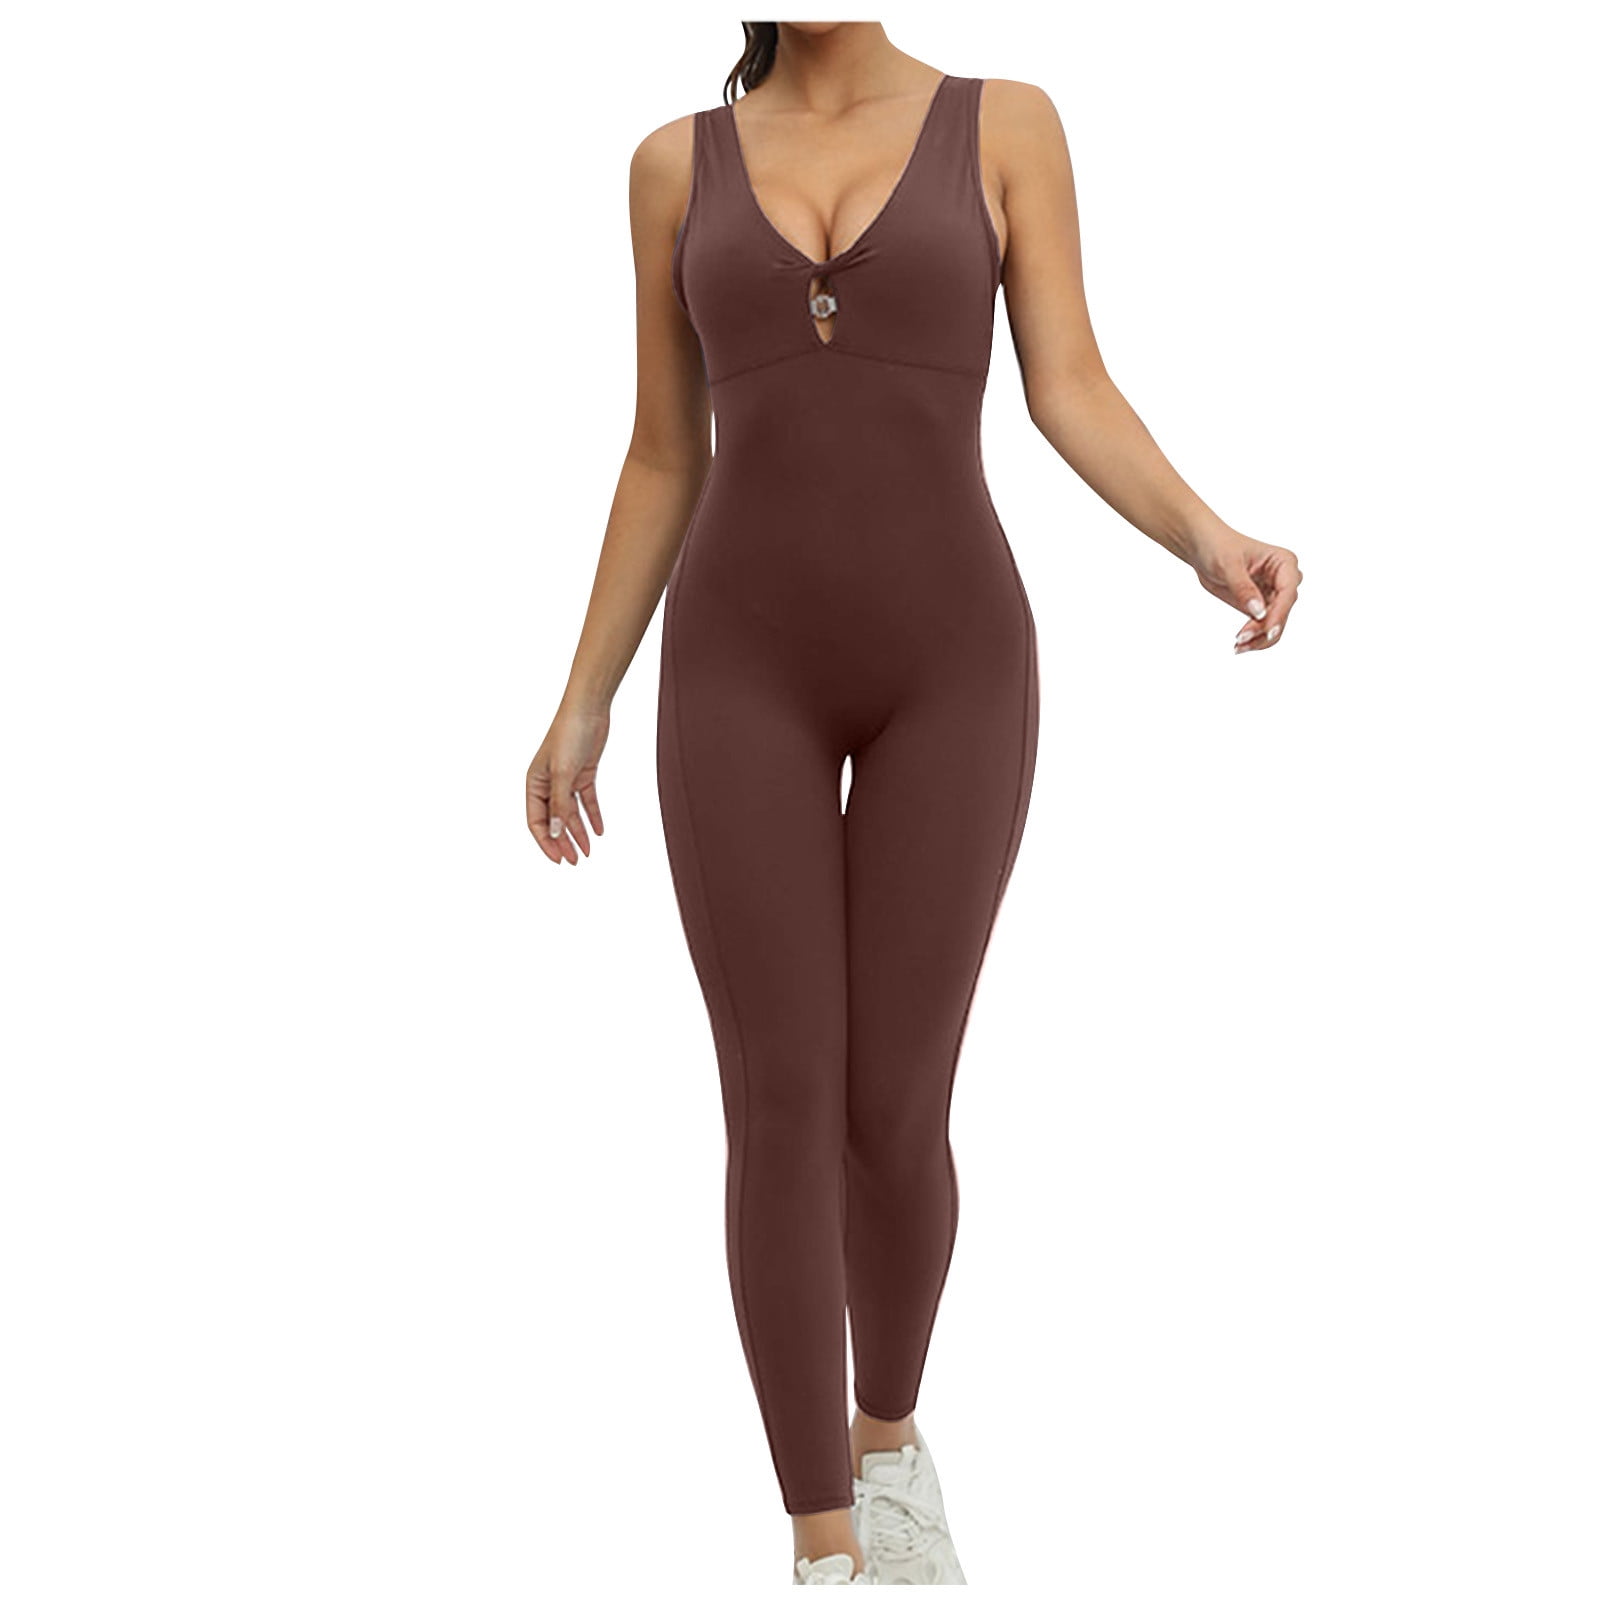  BRASSU 2pcs Jumpsuit Women one Piece Yoga Fitness wear Running  Sportswear Stretch Tight Training Suit (Color : Dark Brown, Size : L) :  Clothing, Shoes & Jewelry